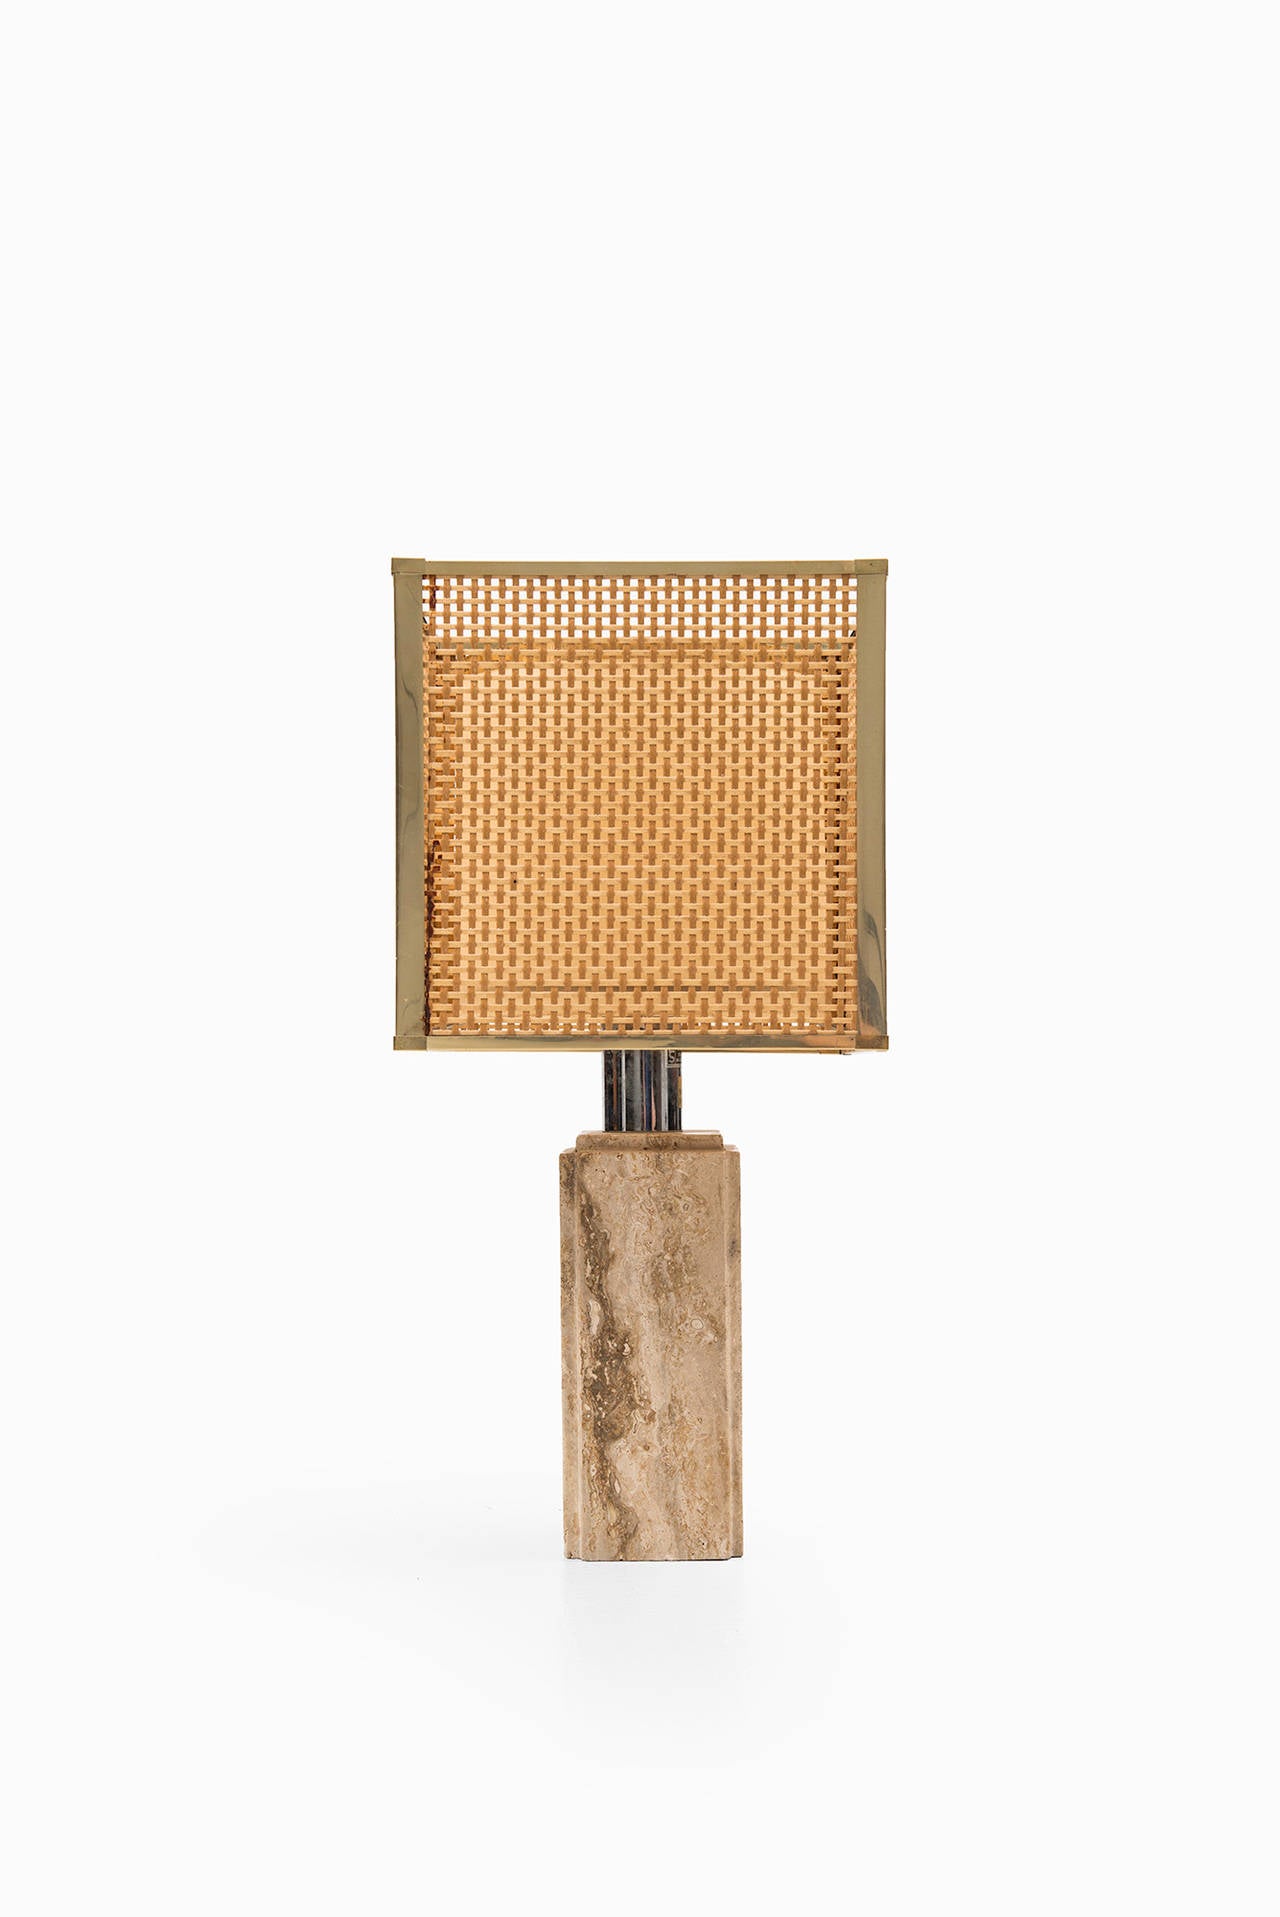 Mid-Century Modern Fili Mannelli Table Lamp in Travertine, Woven Cane and Brass